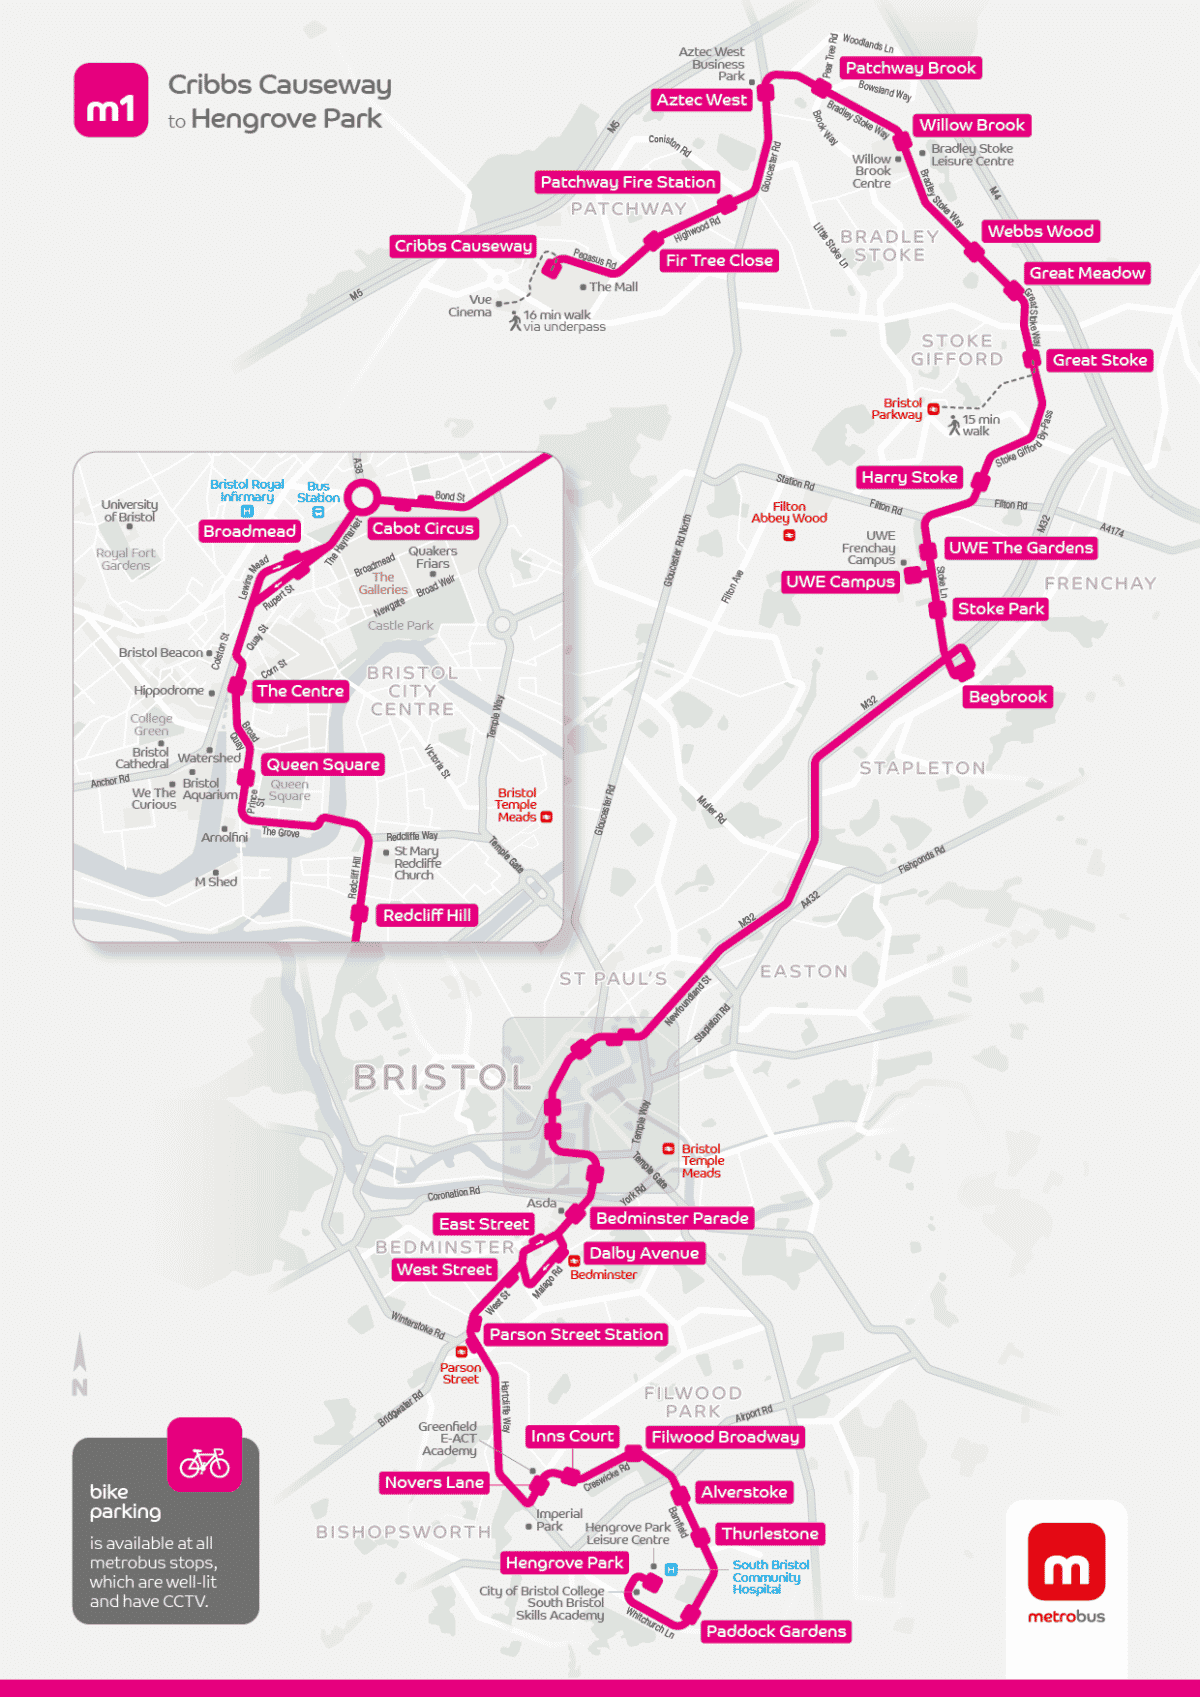 metrobus m1 route map from 18 September 2022 showing the new bus stop Thurlestone, in between Alverstoke and Paddock Gardens.